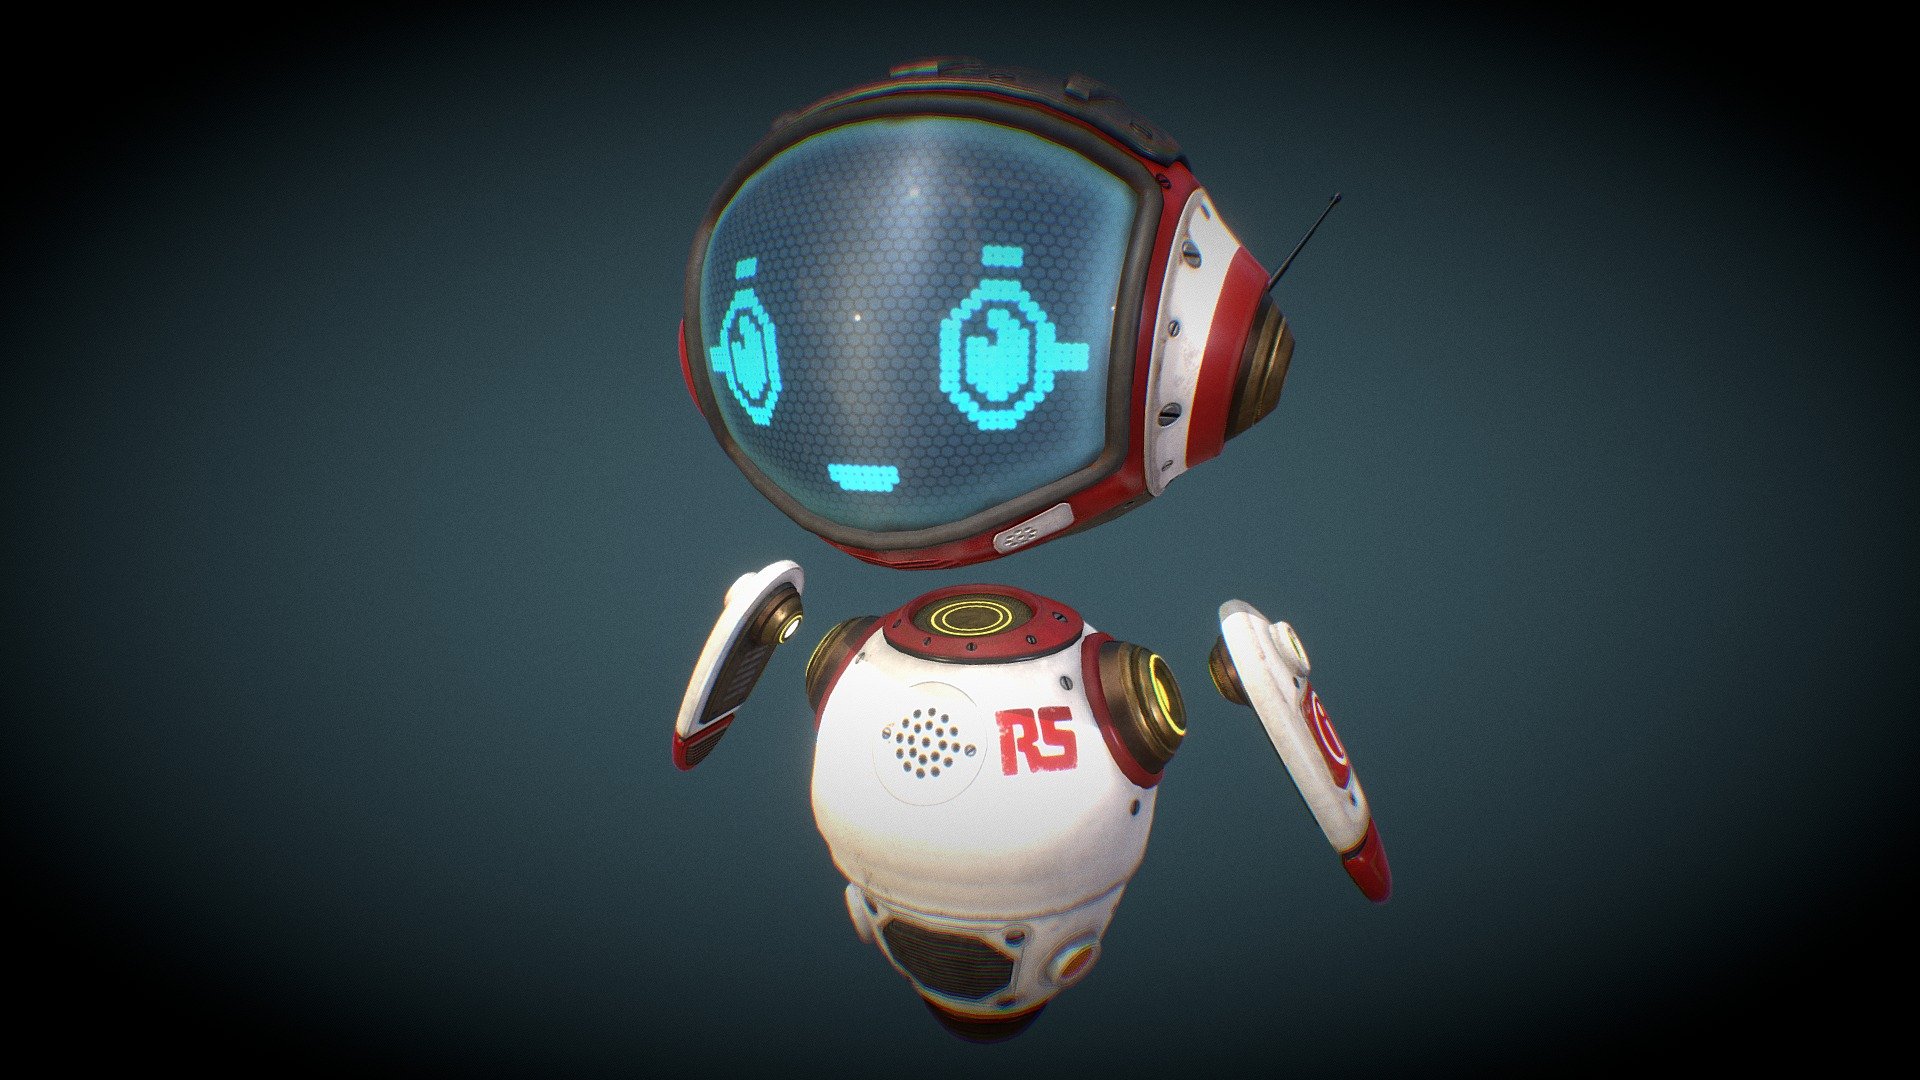 A -levitating- infobot assistant character created for a virtual reality RS components commercial. It guides the viewer through the experience and provides info about the surrounding environments and objects.

software: Maya / Substance Painter - Aressa (Rs Robotic Assistant) - 3D model by Réplhka (@replhka) 3d model